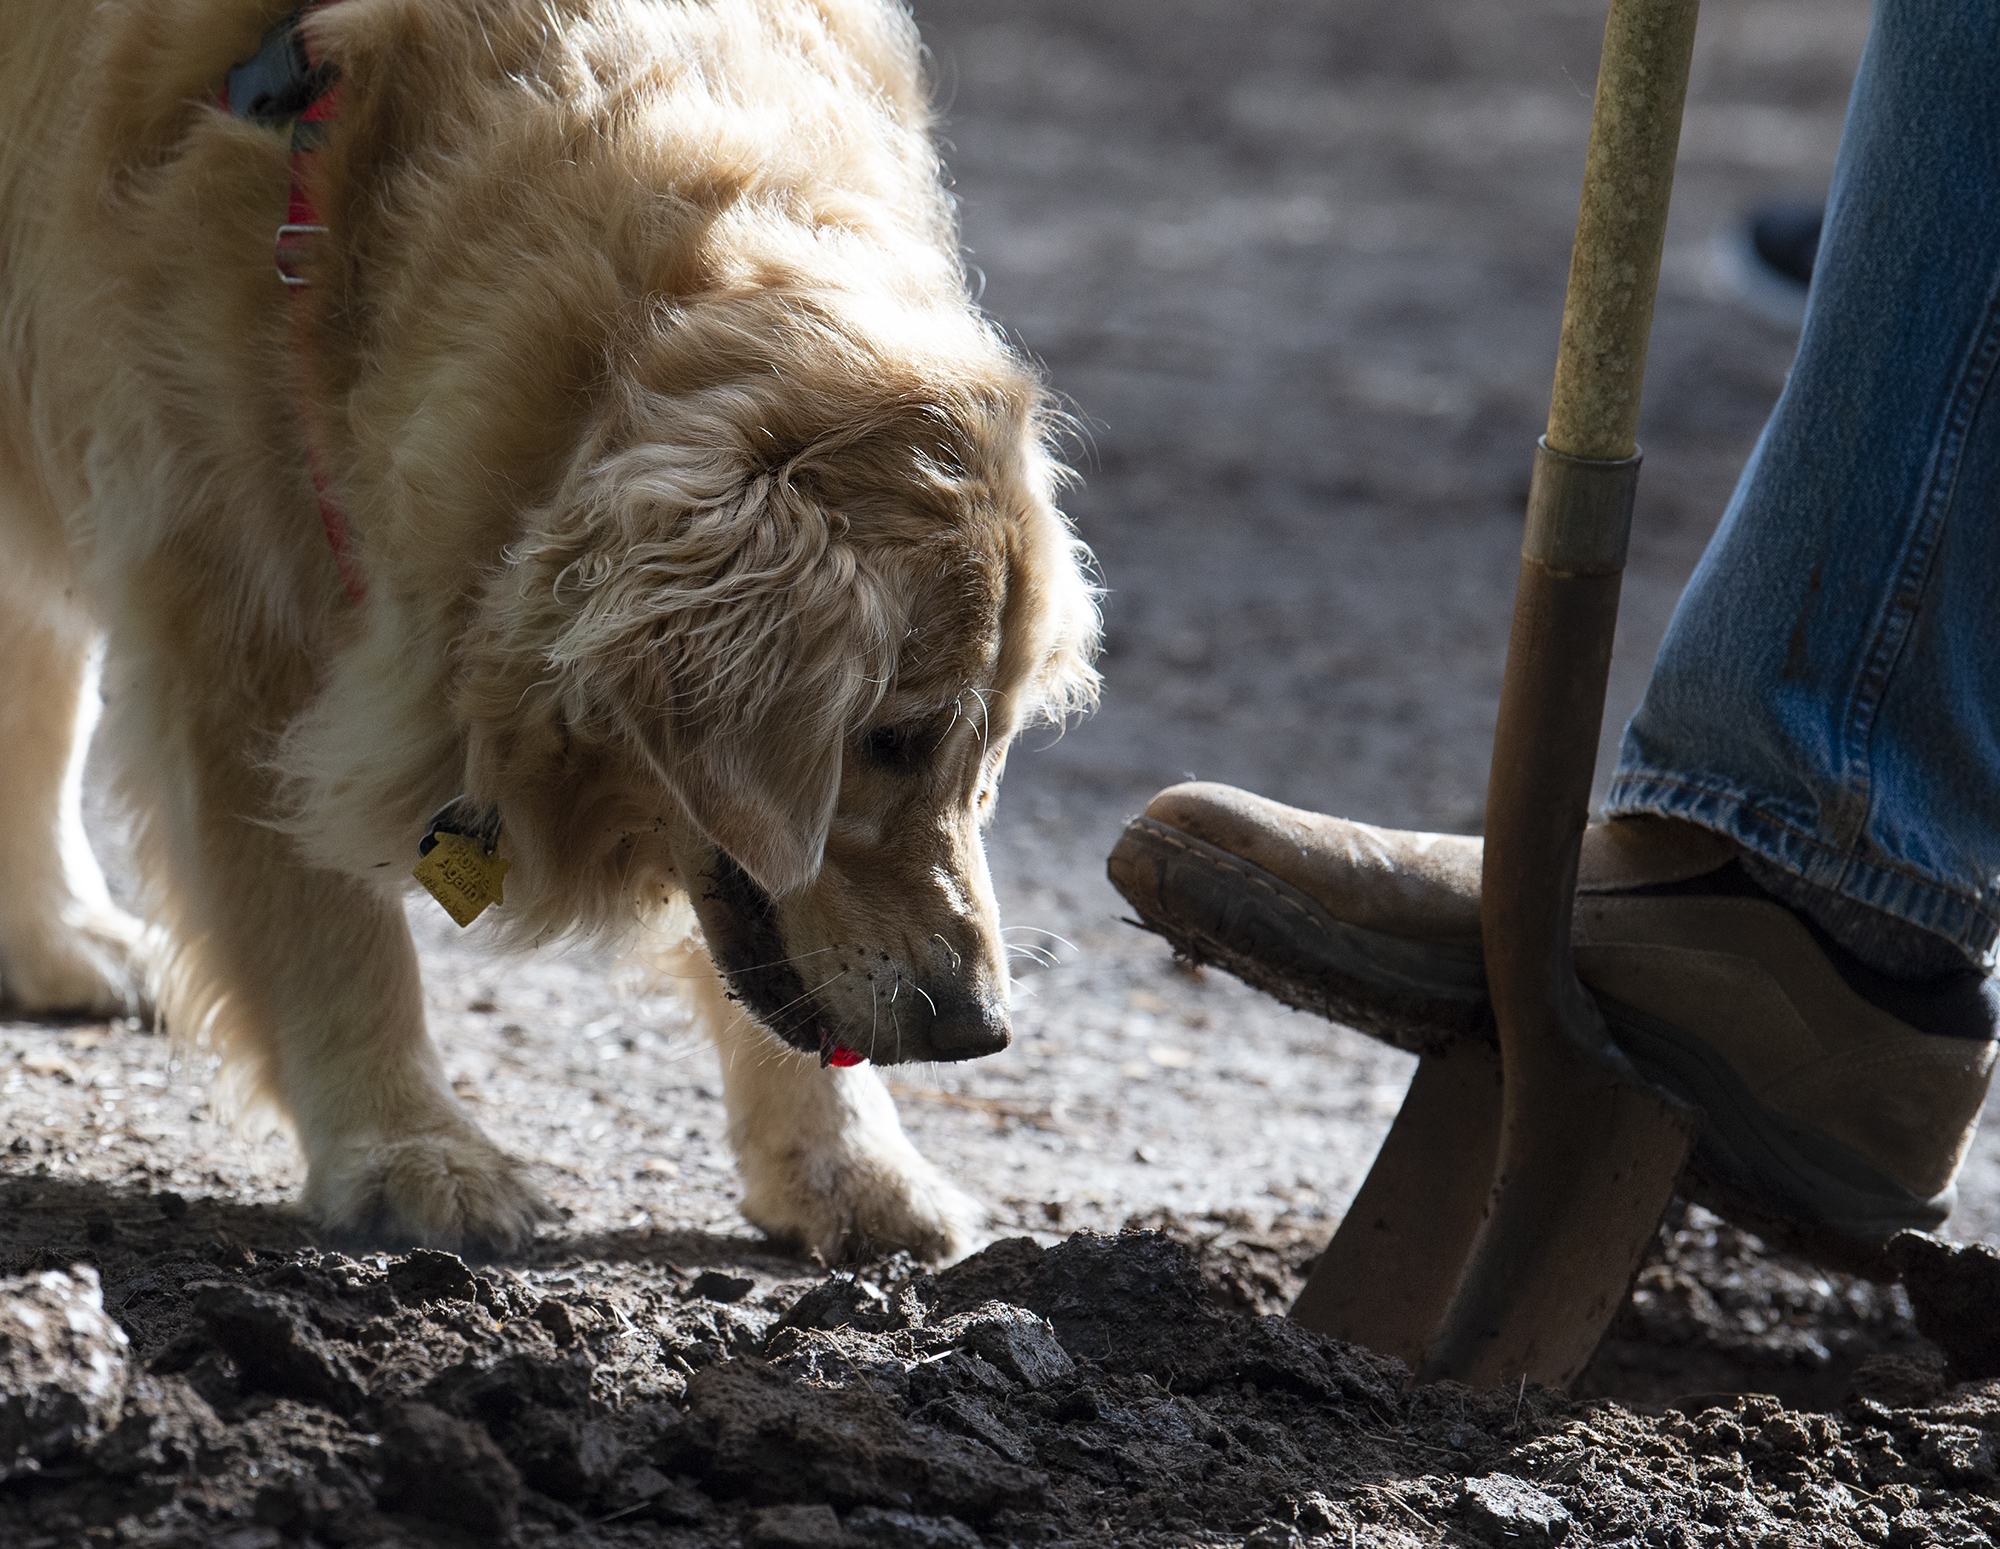 Lucy, a golden retriever, tries to help dig on Saturday, March 6, at Ike Memorial Dog Park in Vancouver. DOGPAW held its volunteer cleanup Saturday, as more than a dozen volunteers dug a trench to help filter water away from some of the muddier spots of the park.